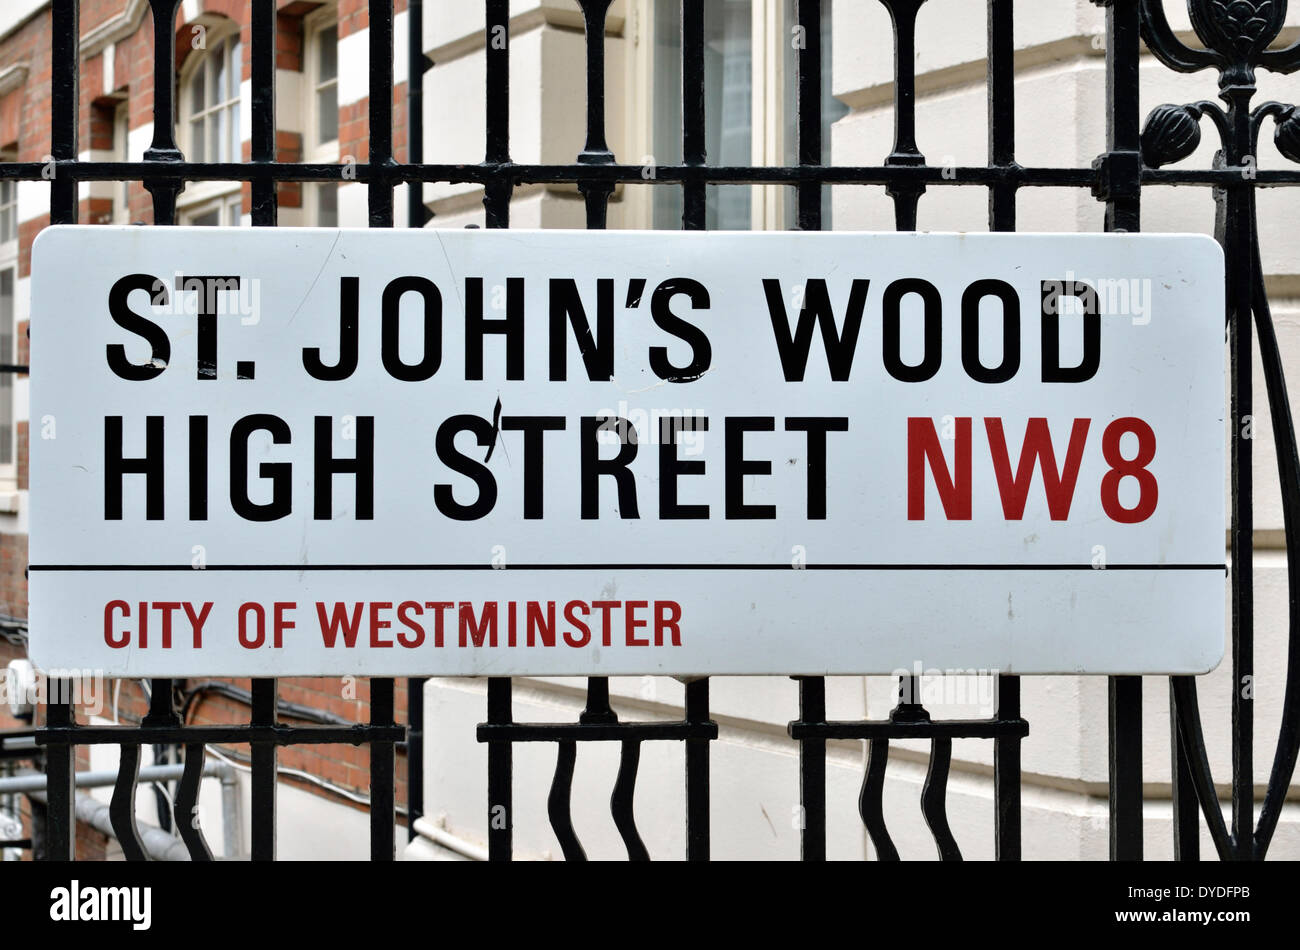 St Johns Wood High Street NW8 City of Westminster street sign. Stock Photo